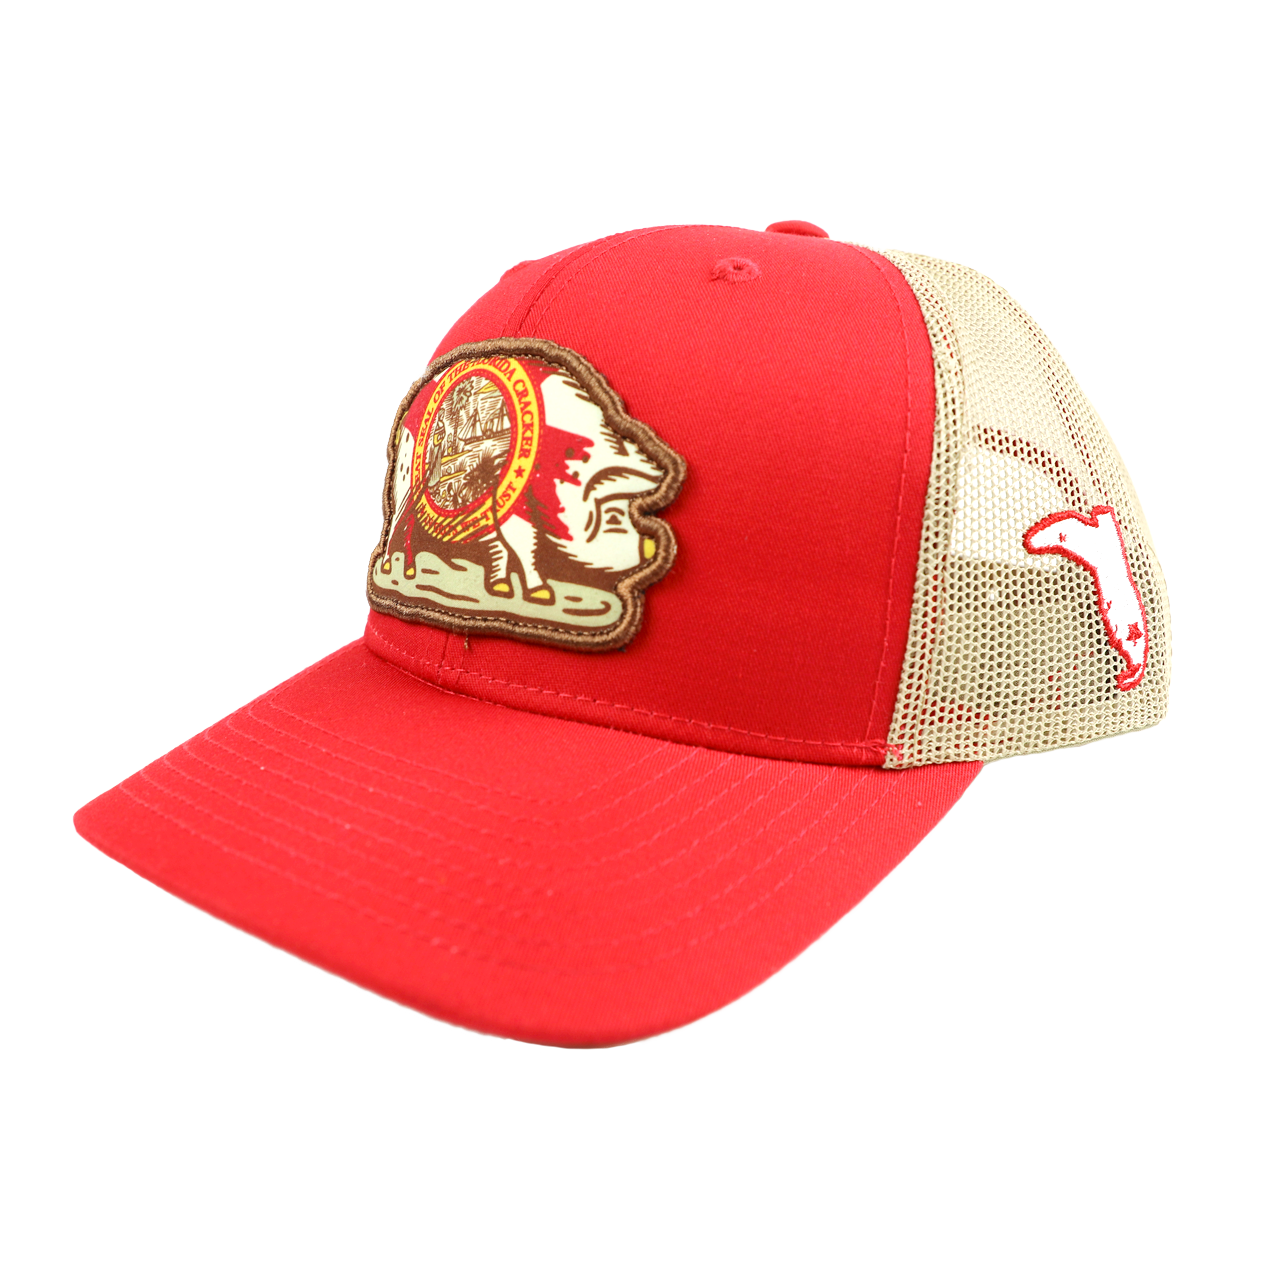 COOK SHACK HAT - STATE FLAG PIG RED/TAN